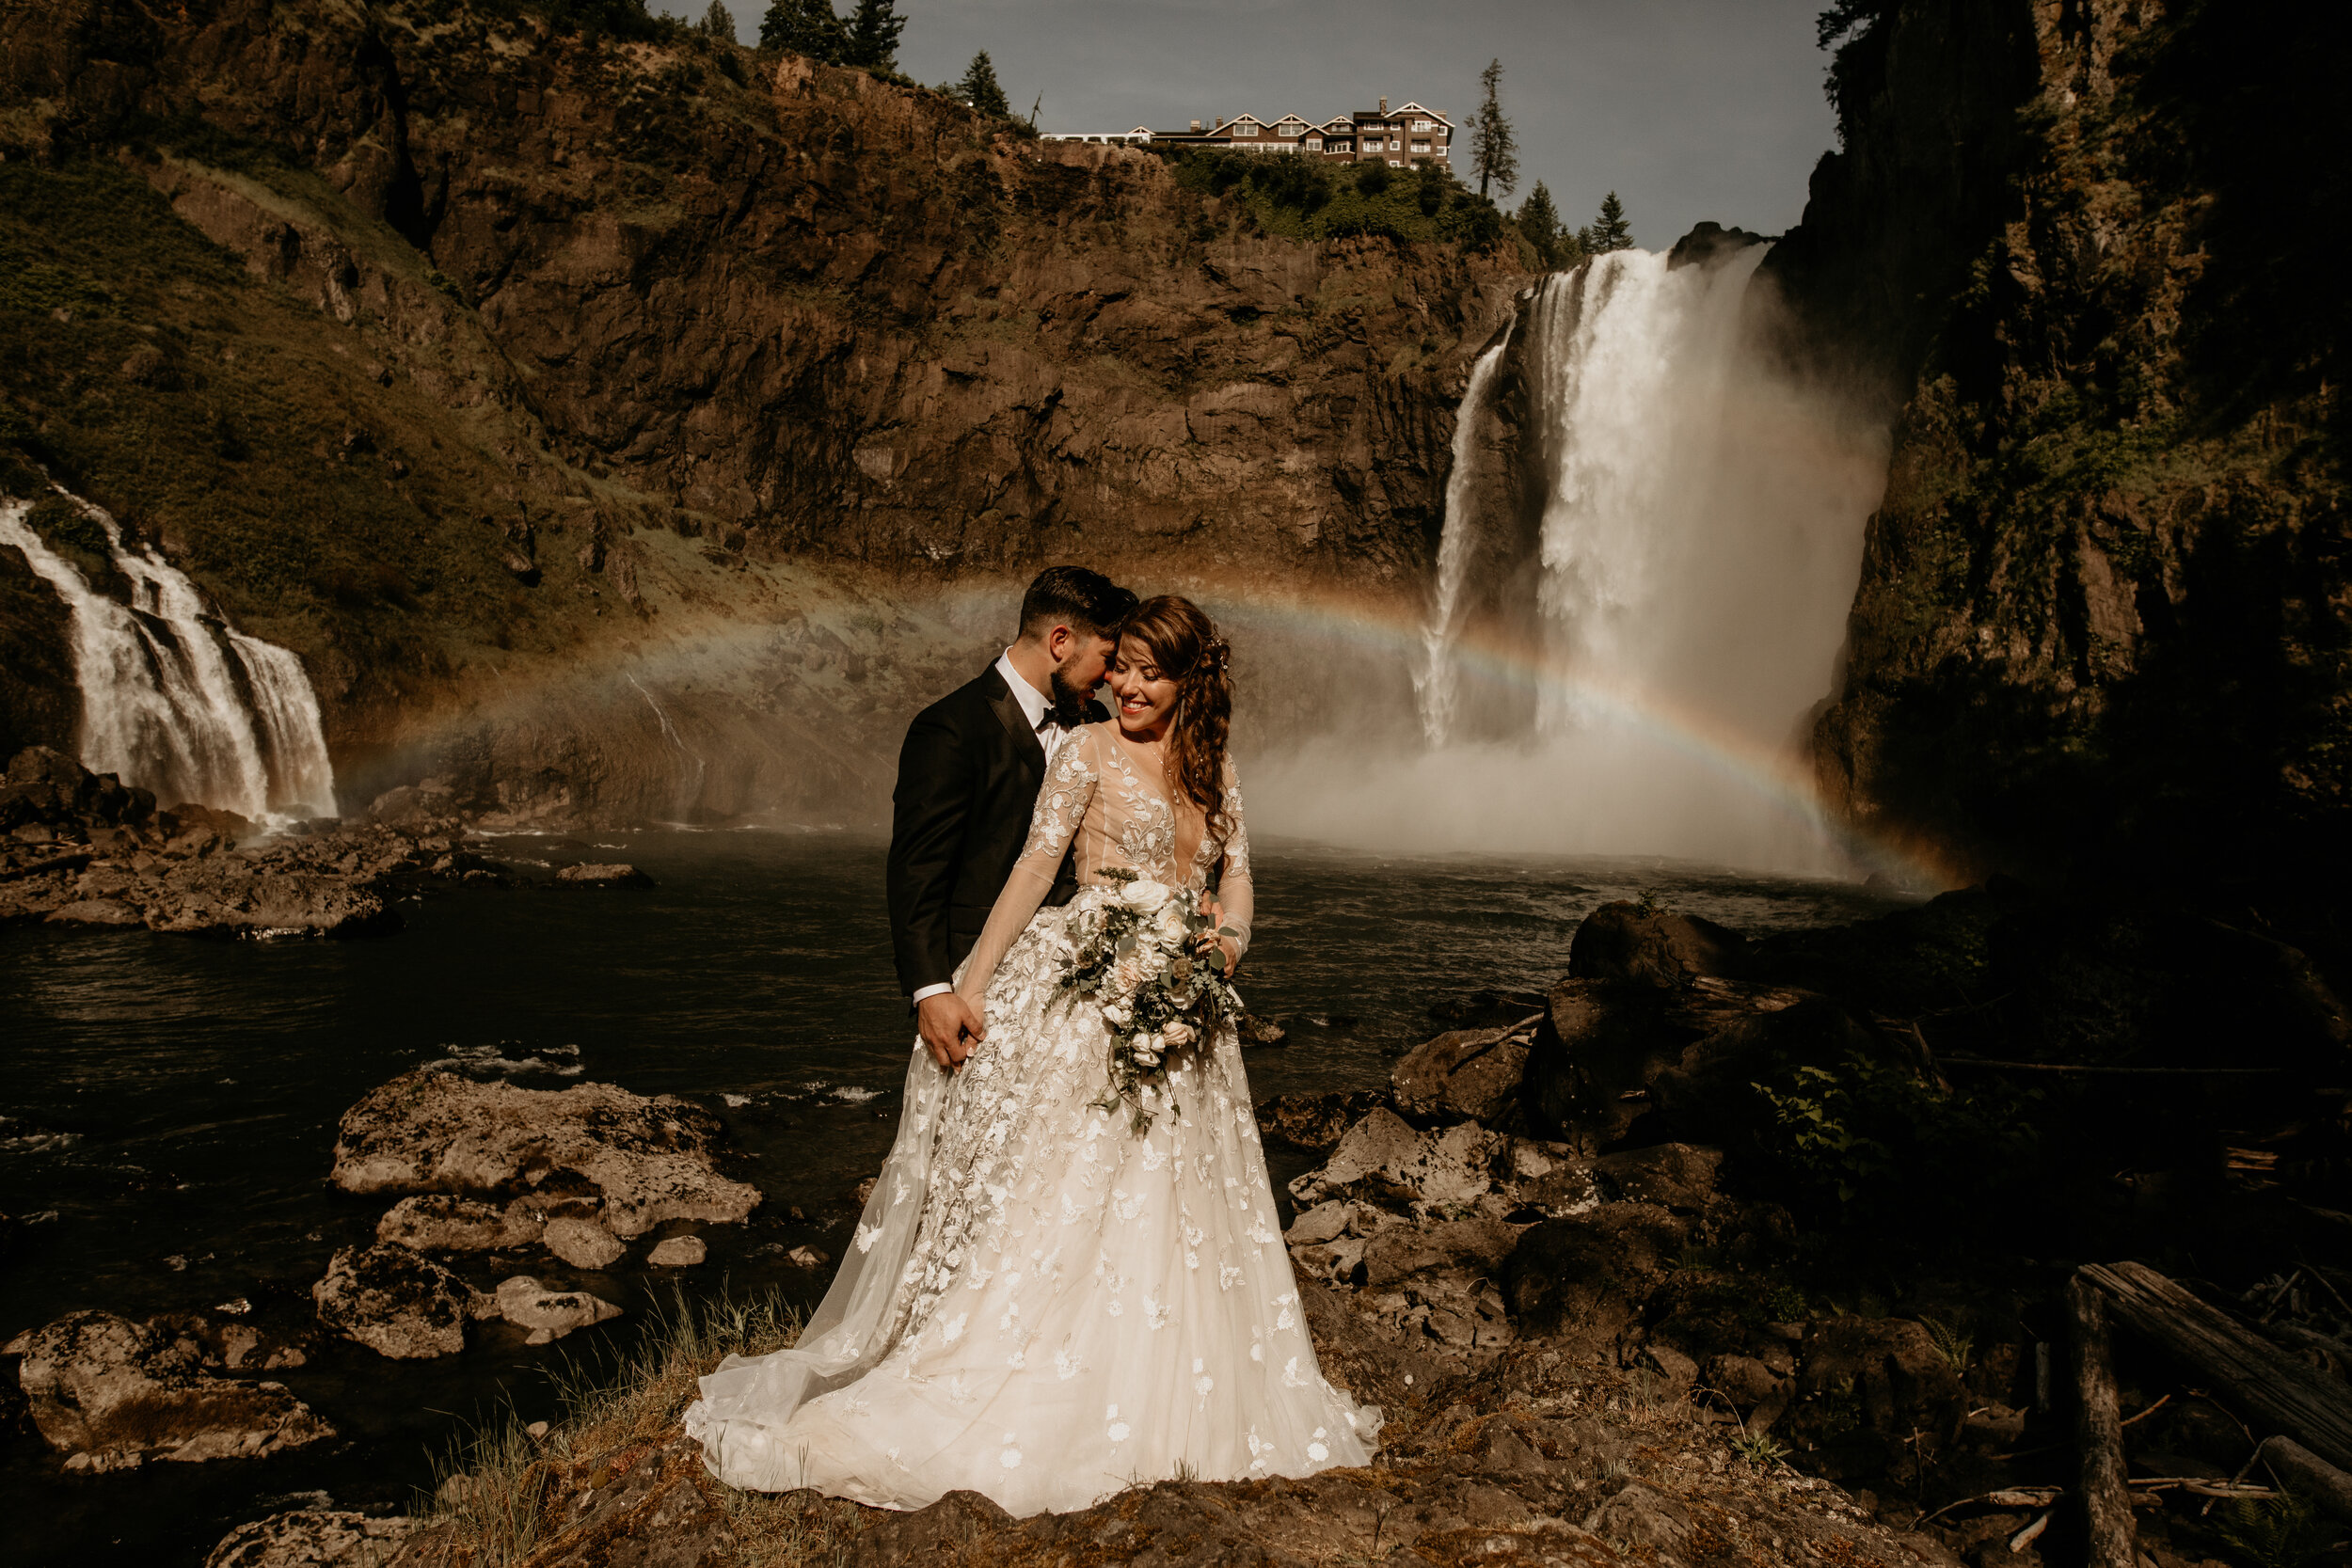 Locations in the US that look like Iceland- Iceland elopement- Iceland elopement photographer- Amalfi coast photographer- diablo lake elopement - Seattle elopement photographer - diablo lake photographer - north cascades elopement photographer - Seattle wedding photographer - cute couple - elope instead - breeanna lasher photographer - Iceland lookalike locations - Rialto beach elopement - Rialto beach elopement photographer - Rialto beach wedding&nbsp;